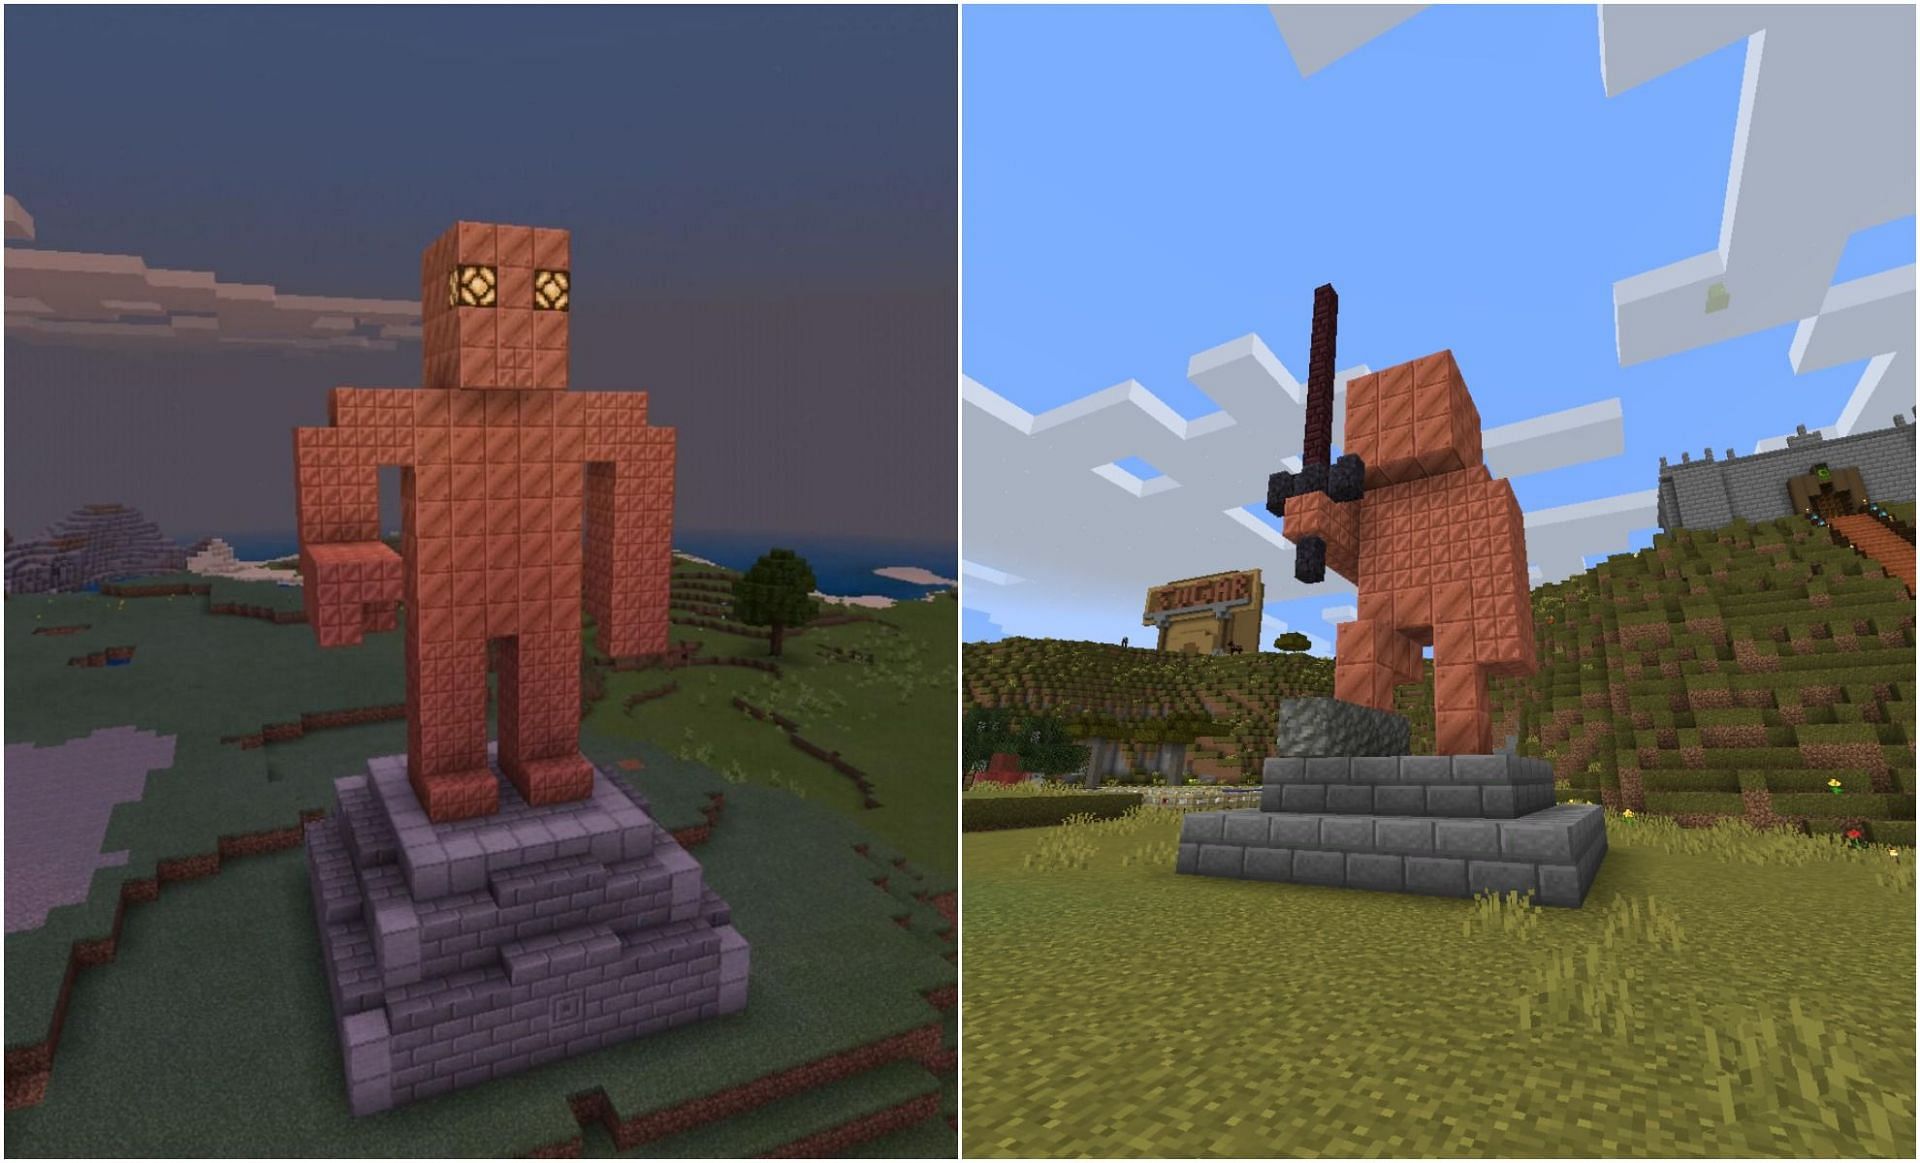 Stues are a popular build in Minecraft (Image via Minecraft)